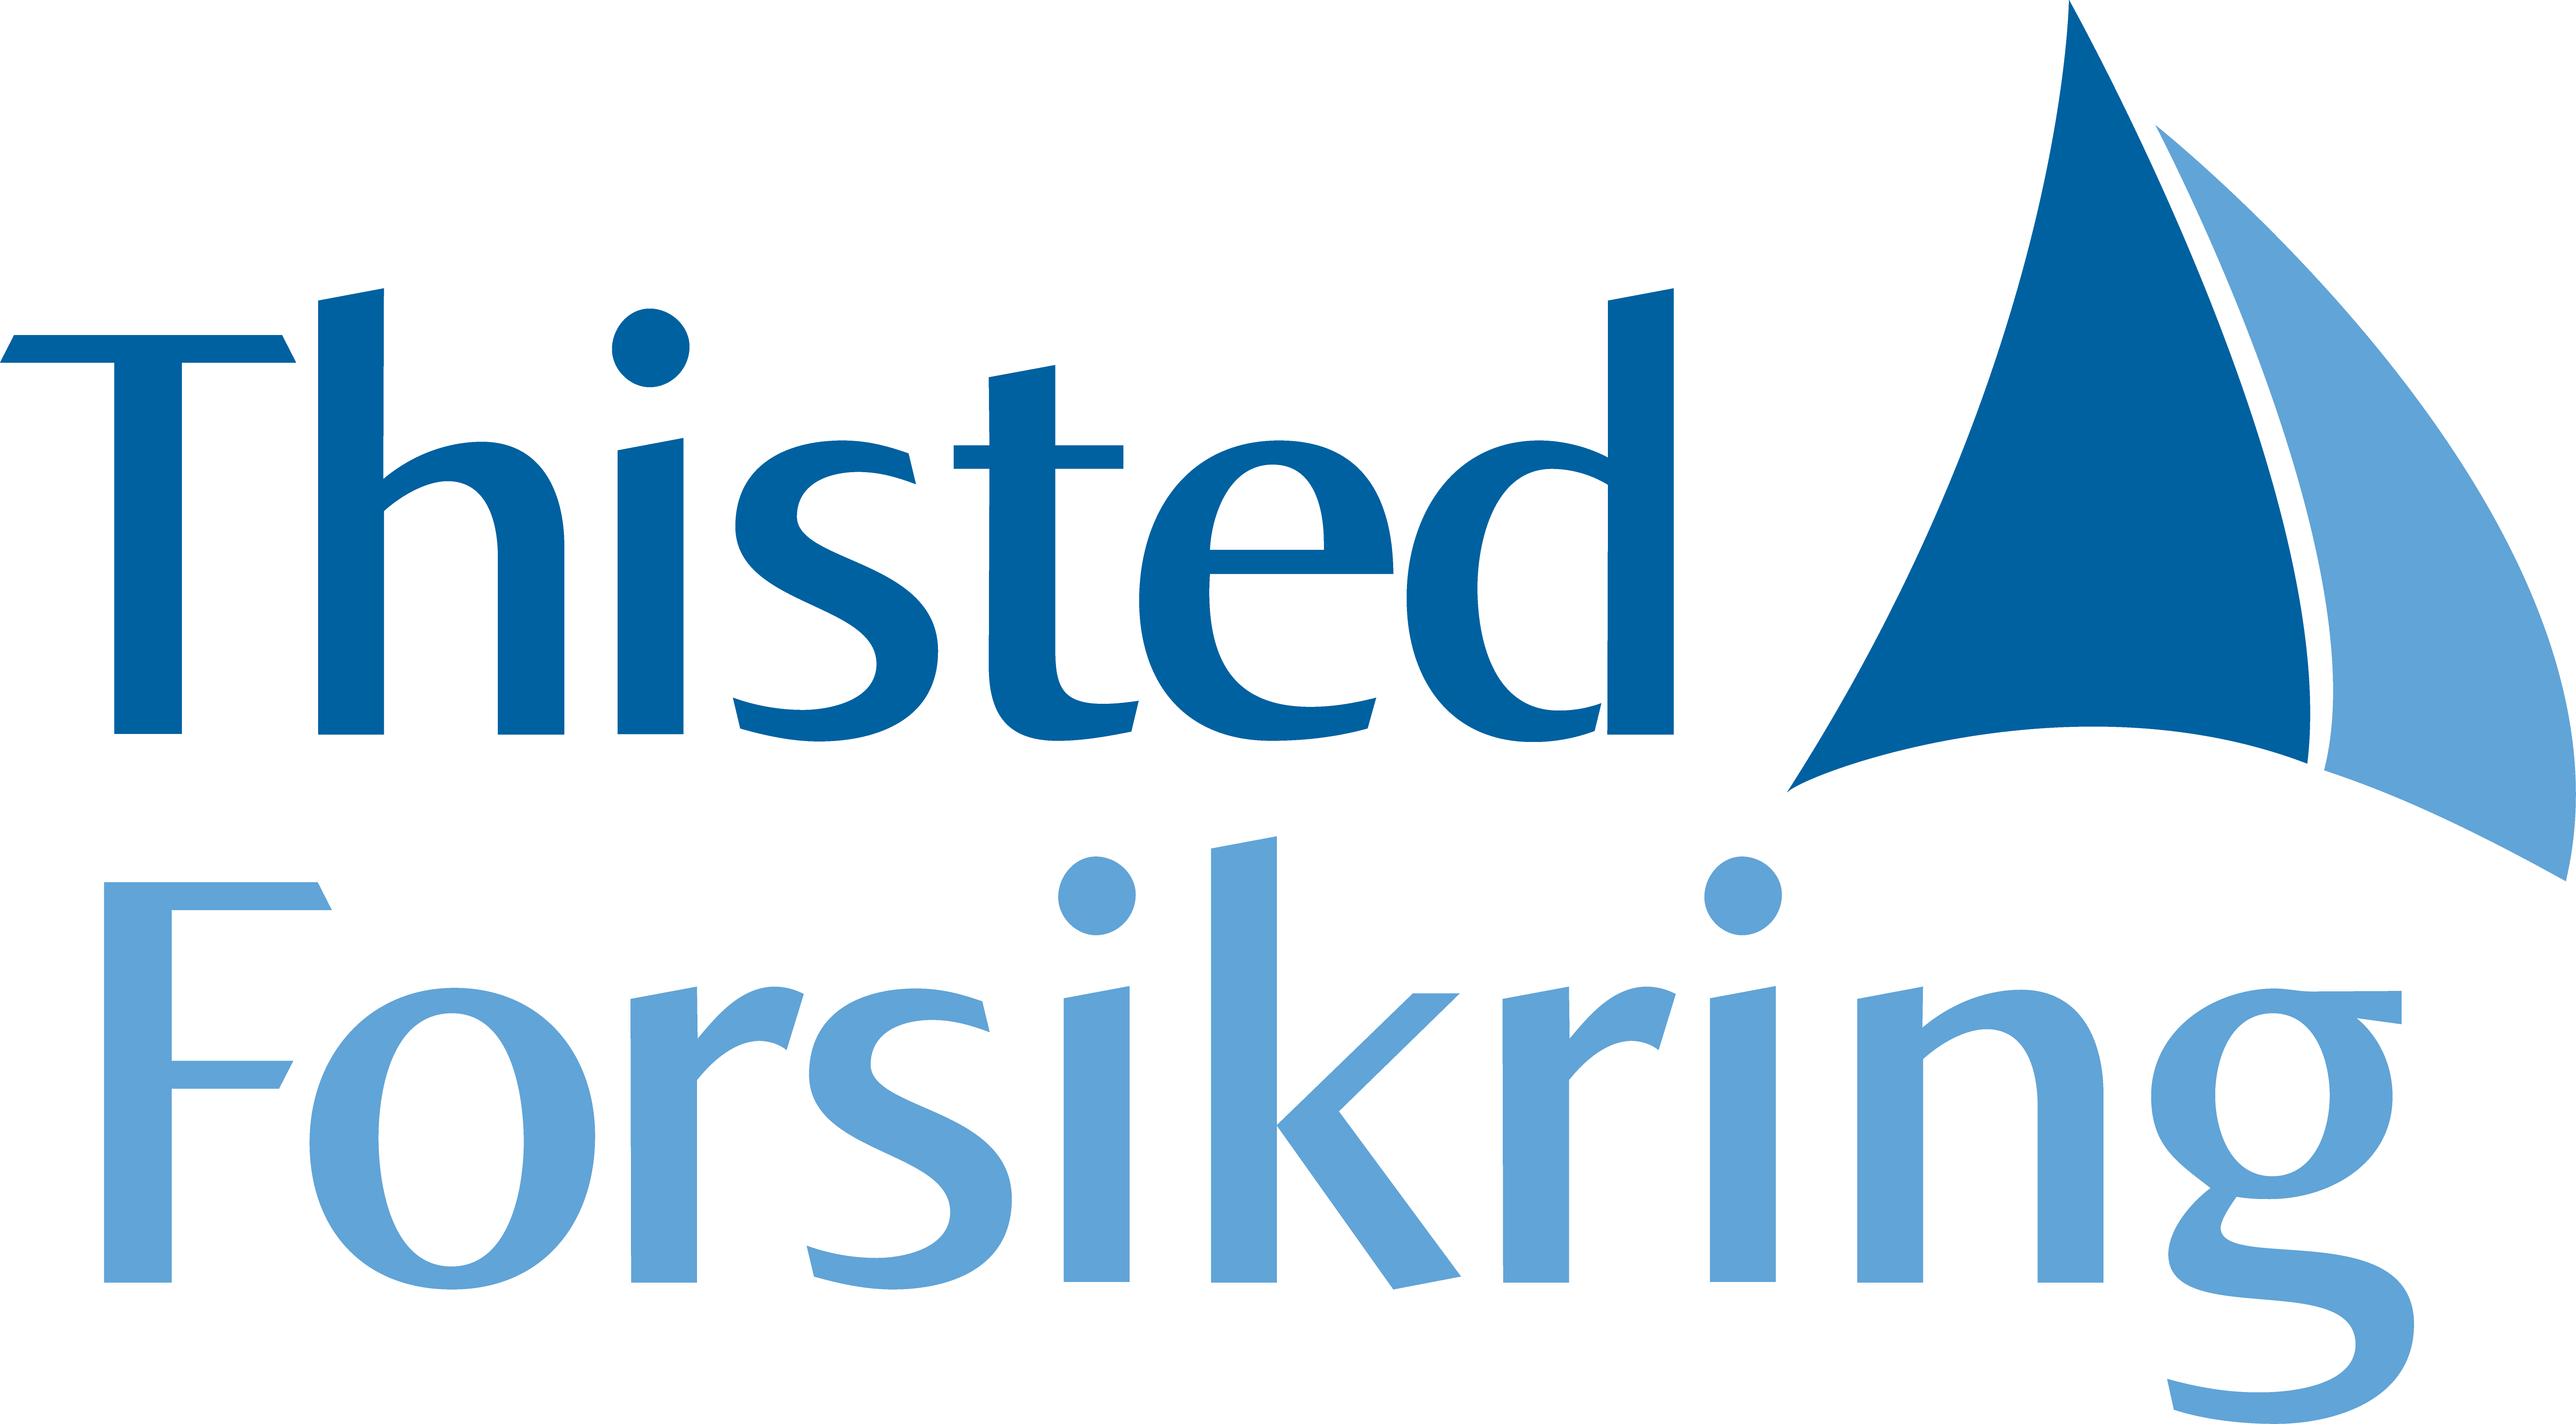 Thisted Forsikring Logo.png